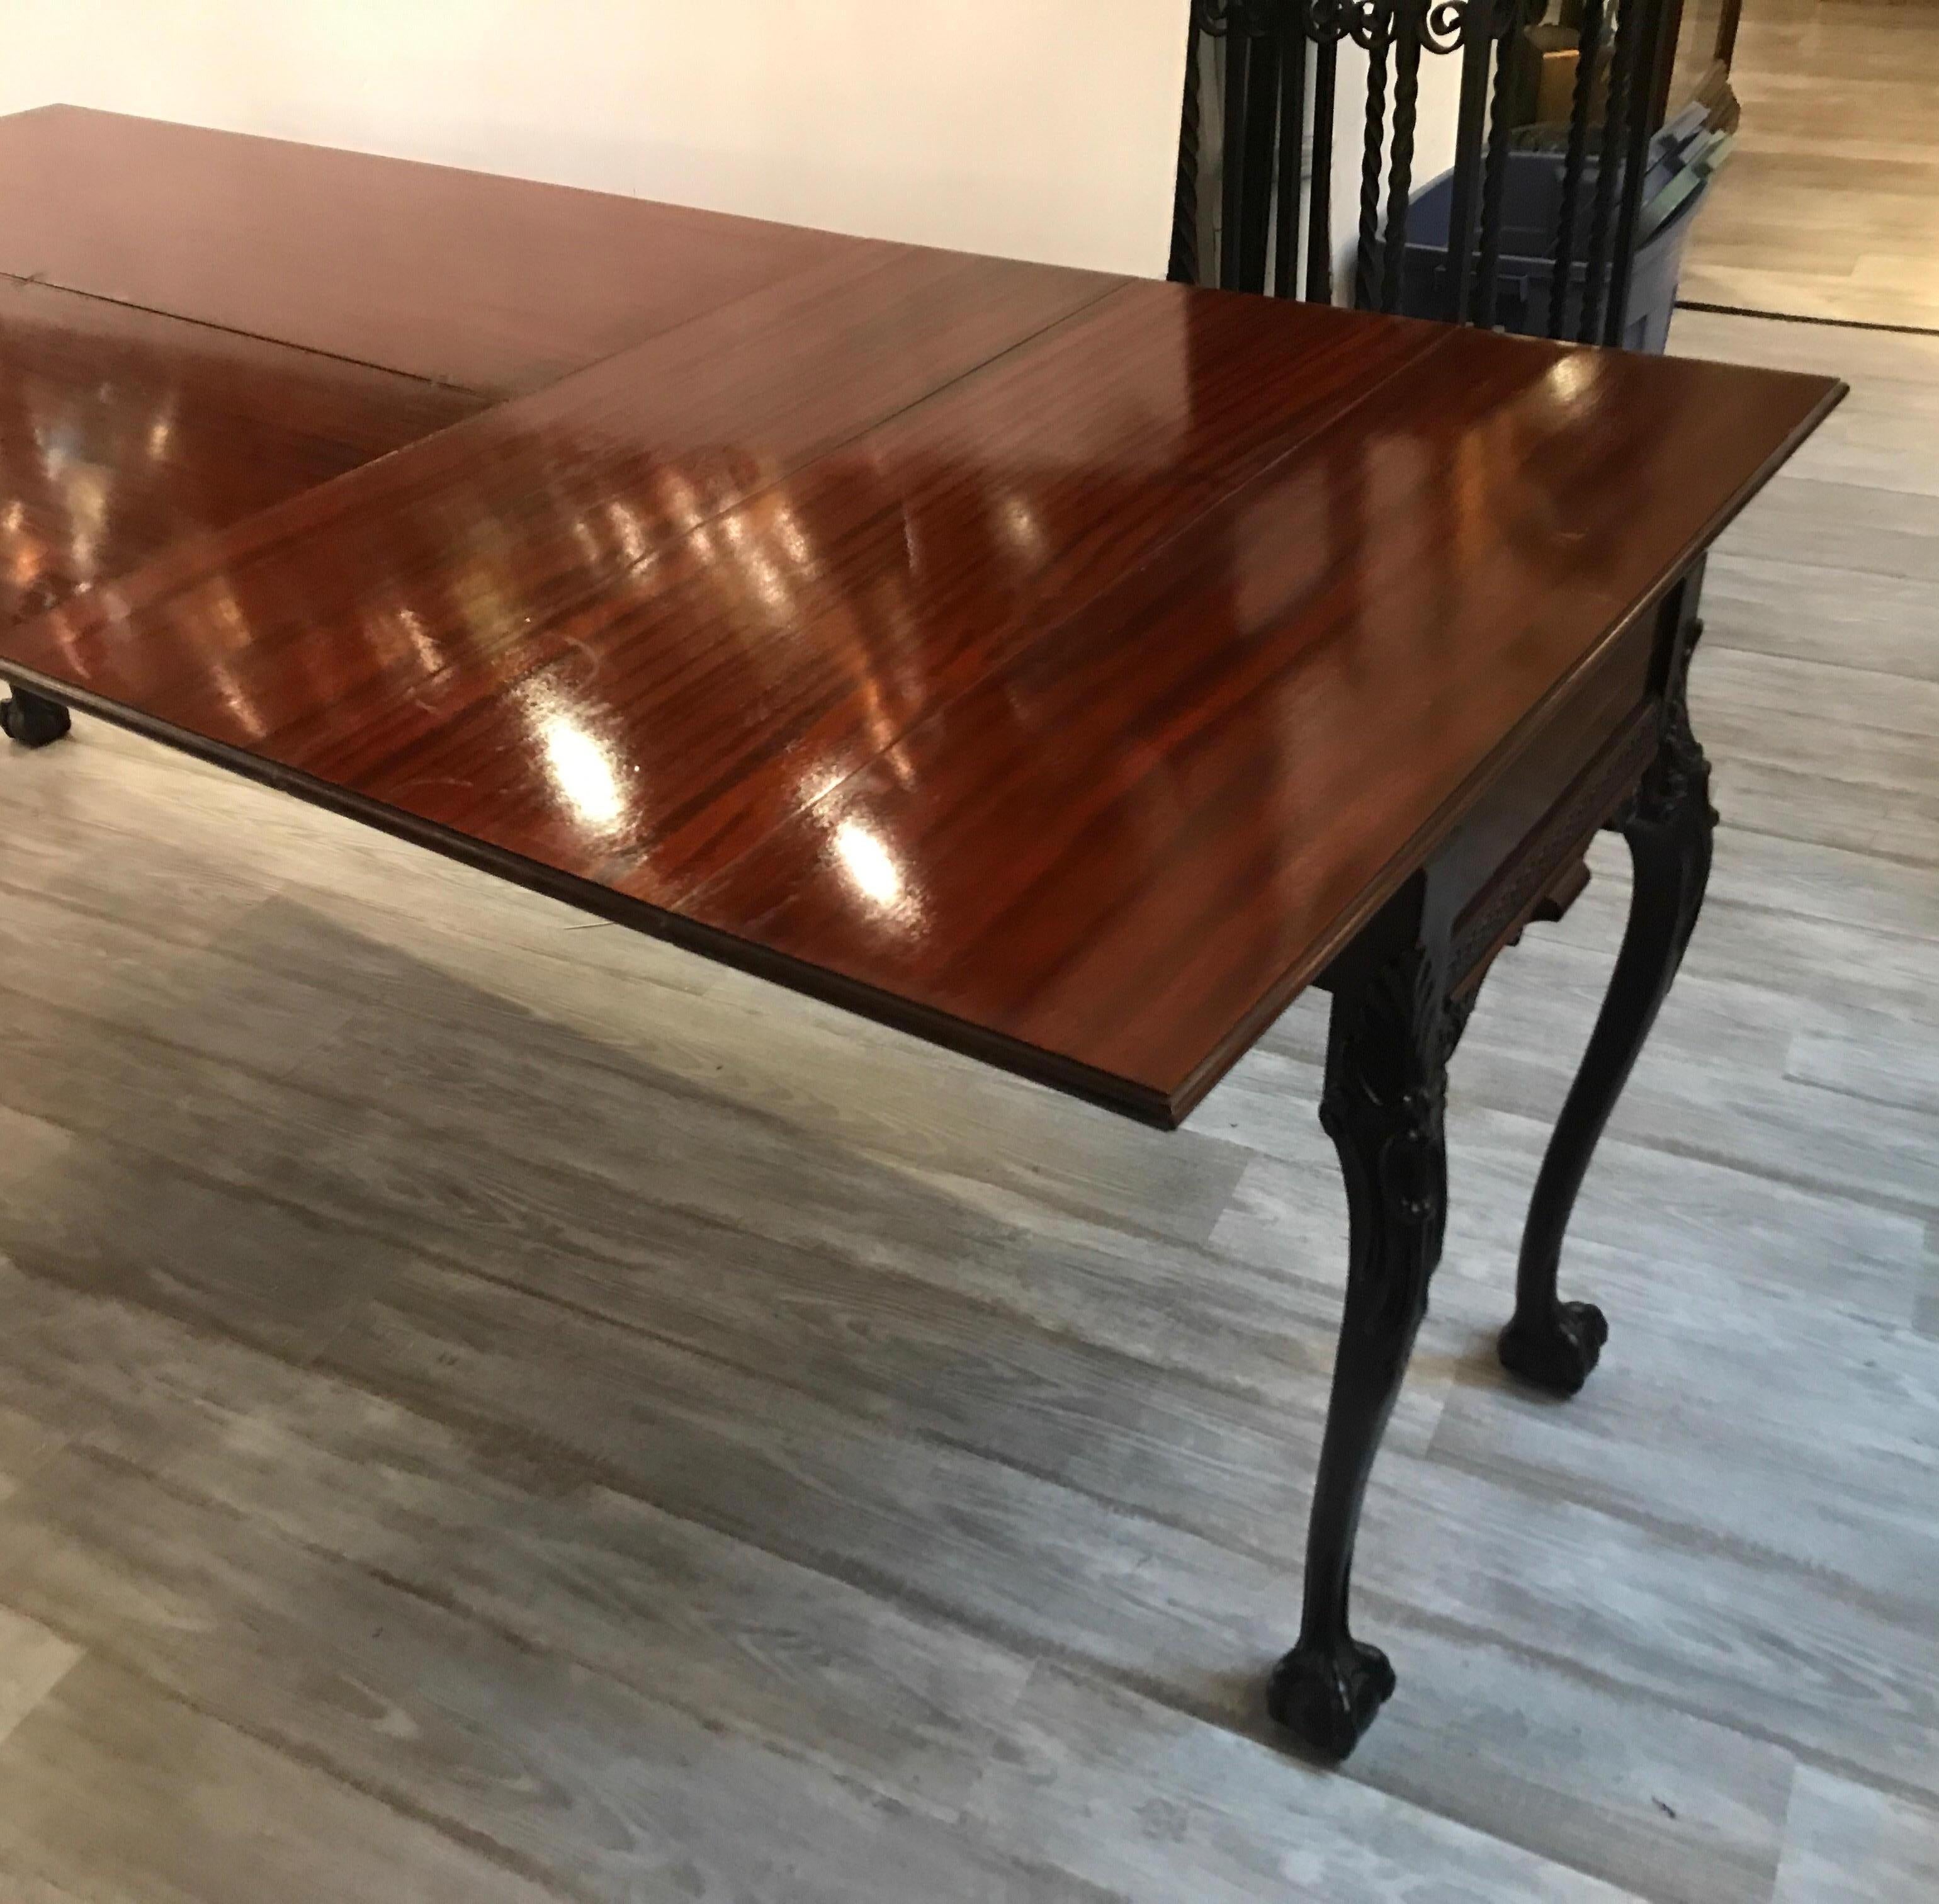 Hand Carved Mahogany Console Table Opens to a Dining Table 5